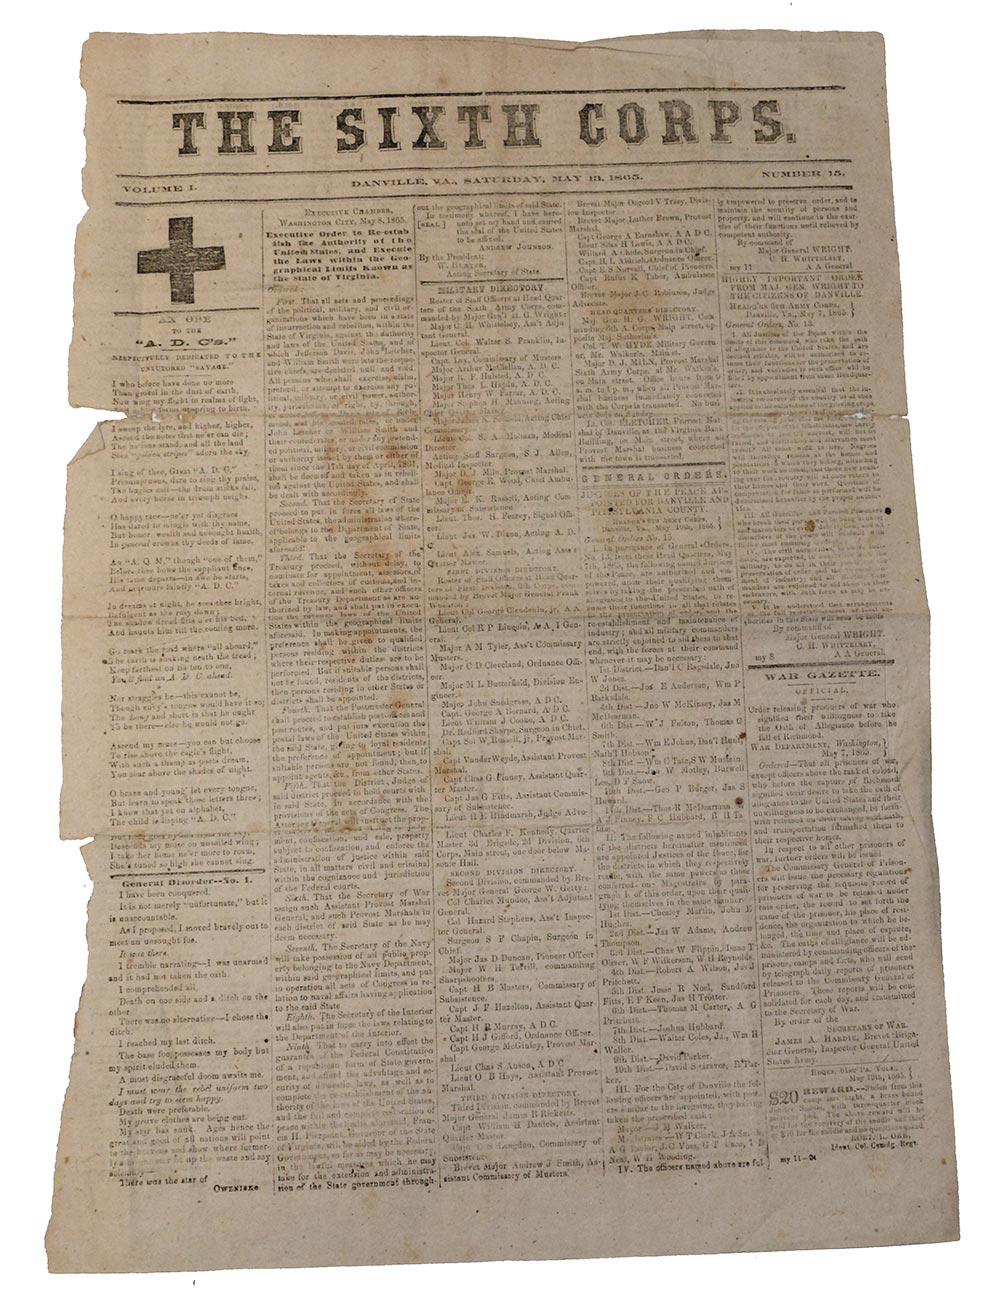 THE SIXTH CORPS  NEWSPAPER – MAY 13, 1865